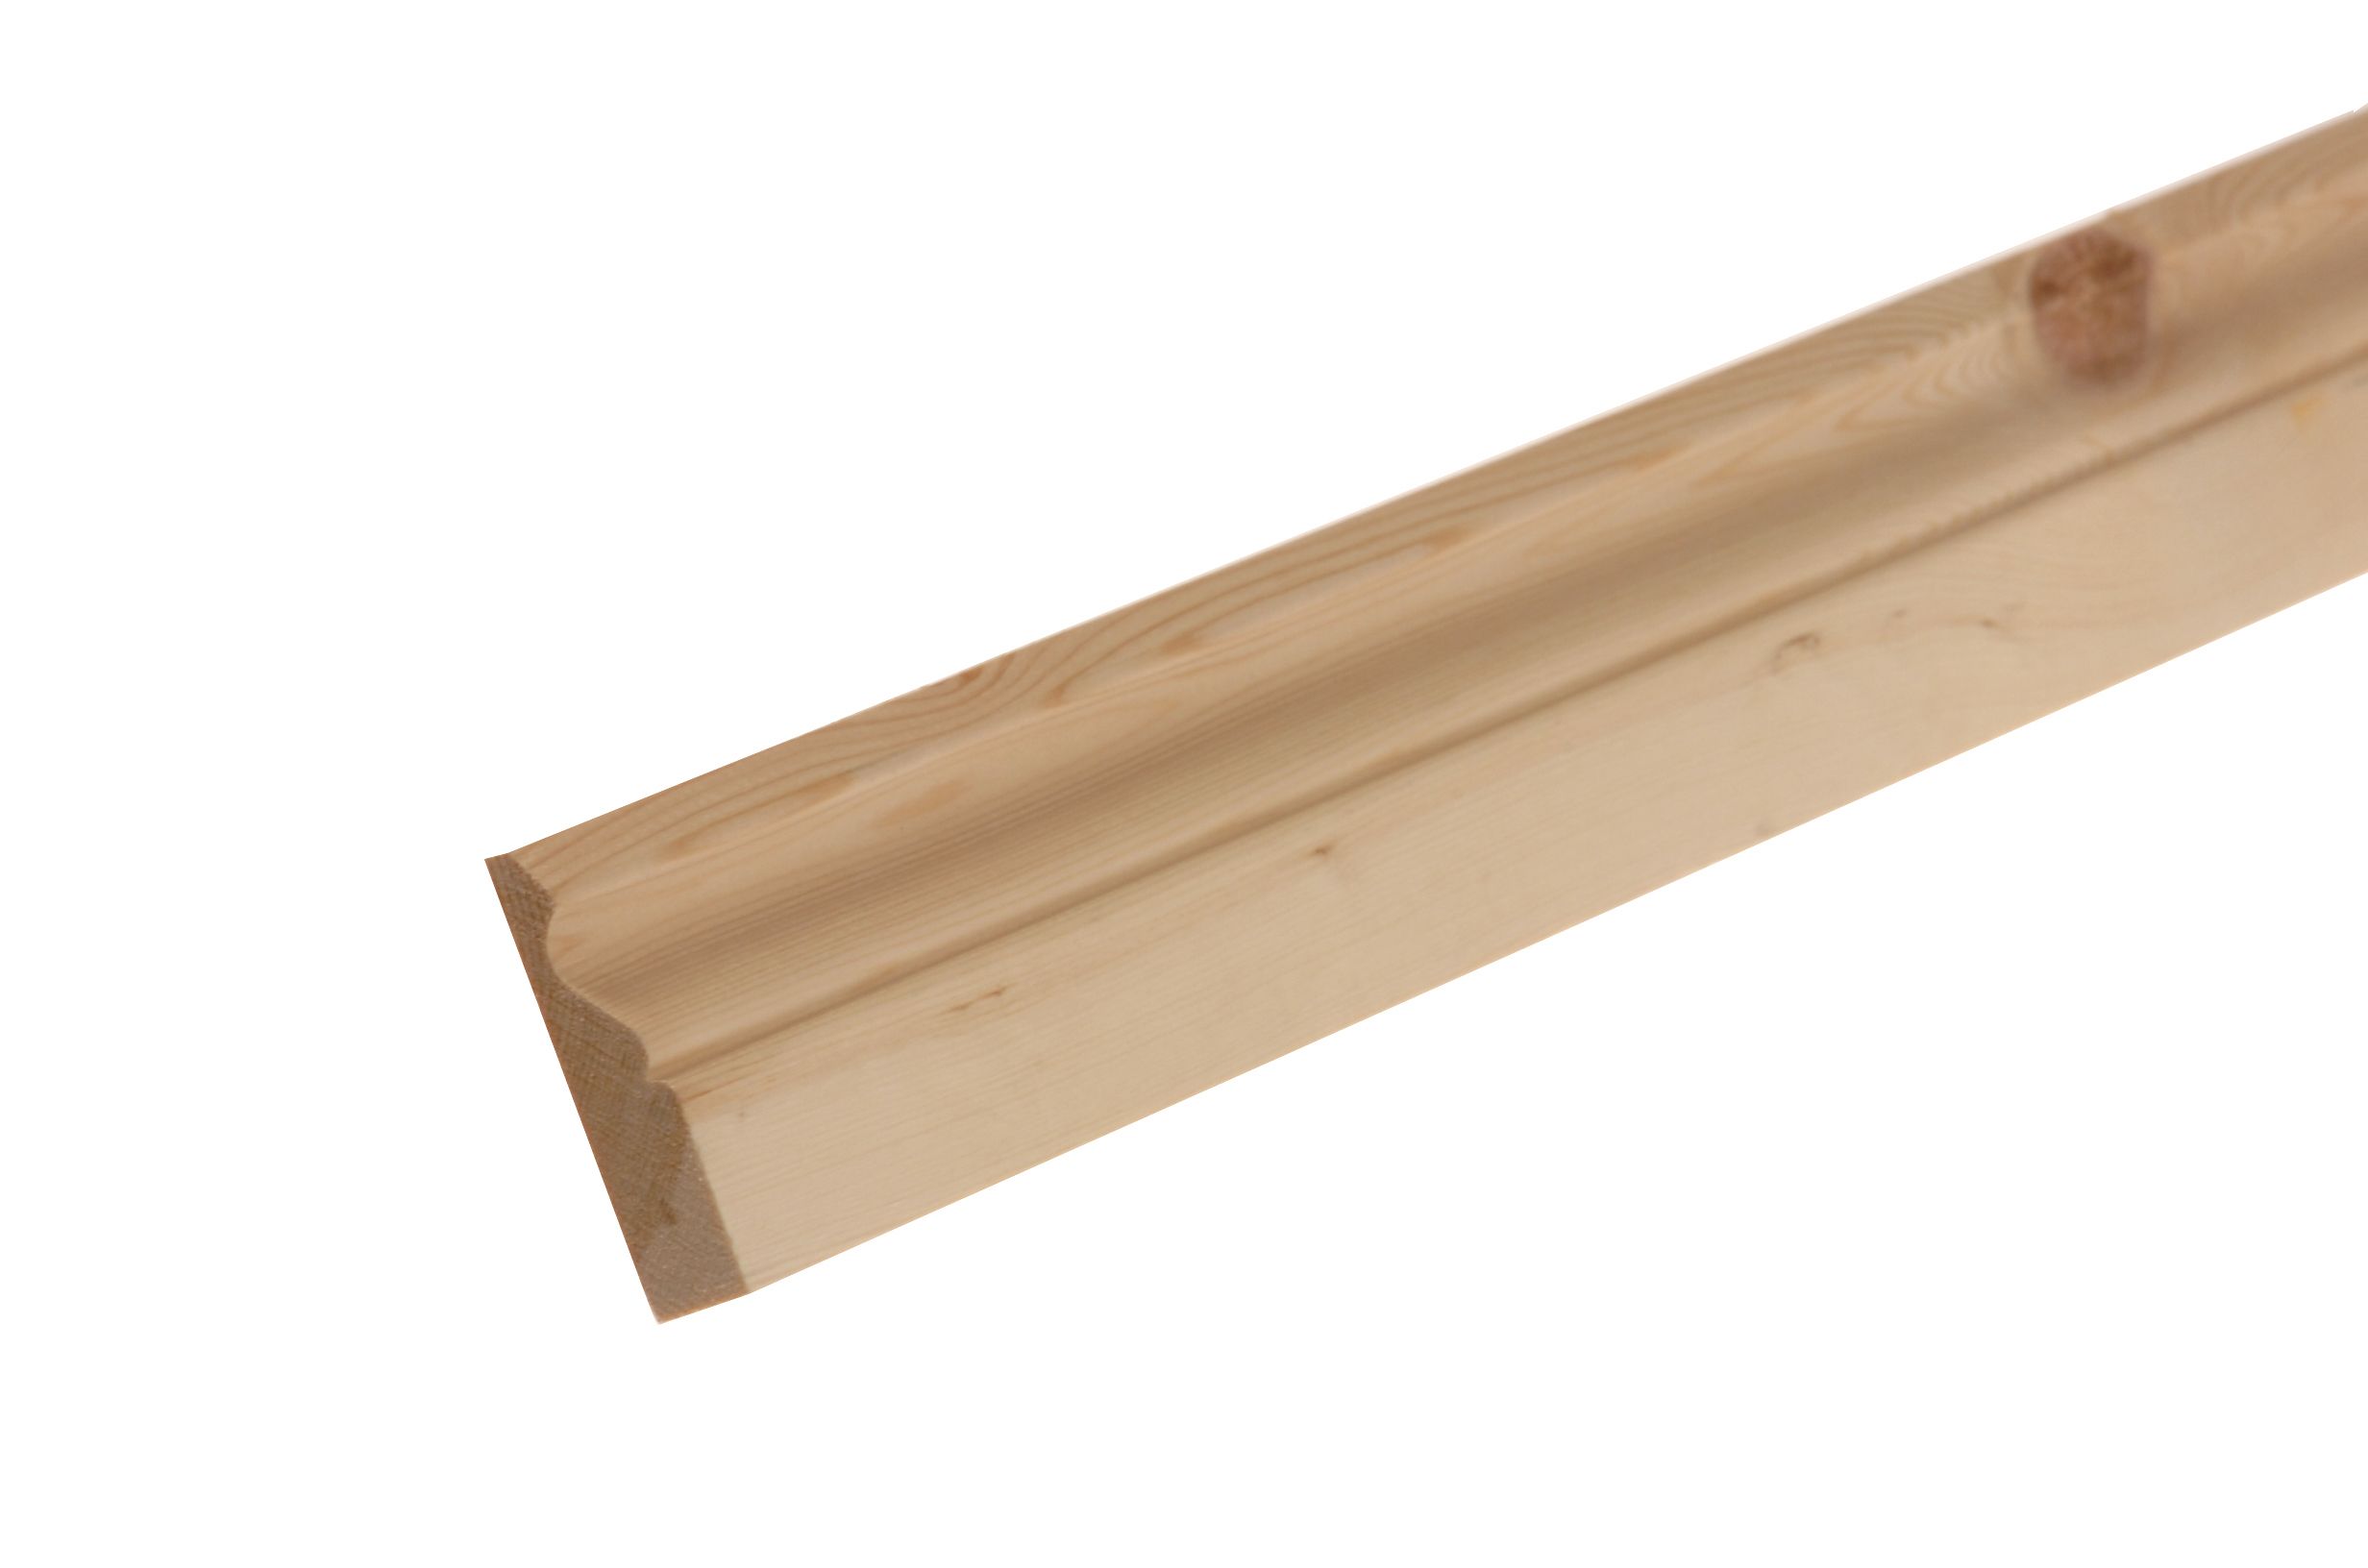 GoodHome Planed Natural Pine Ogee Architrave (L)2.1m (W)58mm (T)15mm, Pack of 5